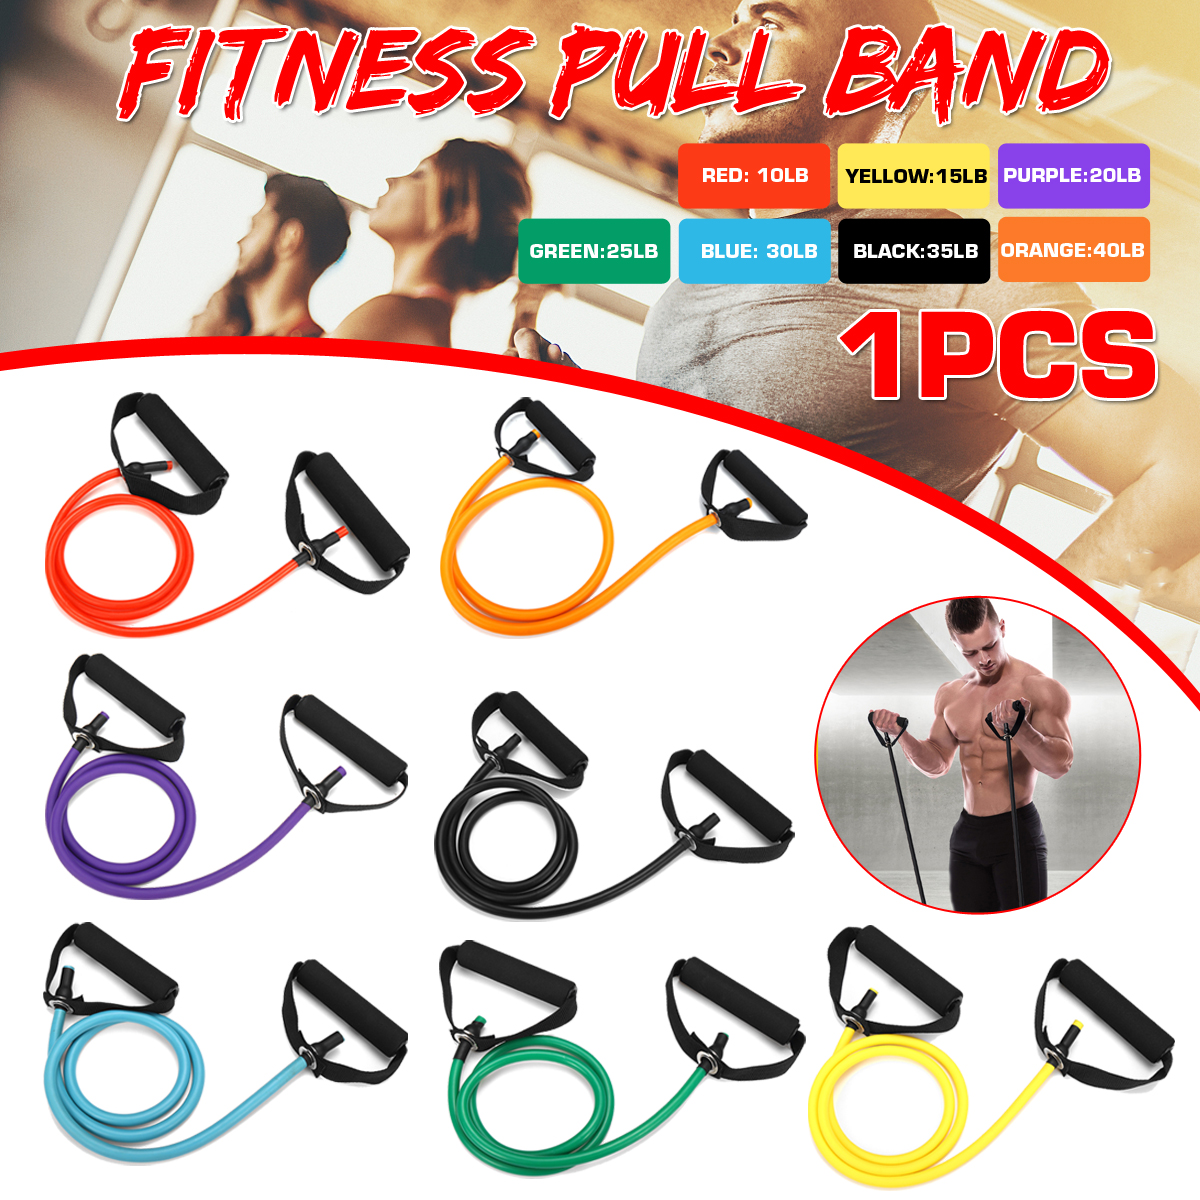 1Pc-10152025303540lbs-Resistance-Bands-Fitness-Muscle-Training-Exercise-Bands-1686632-1